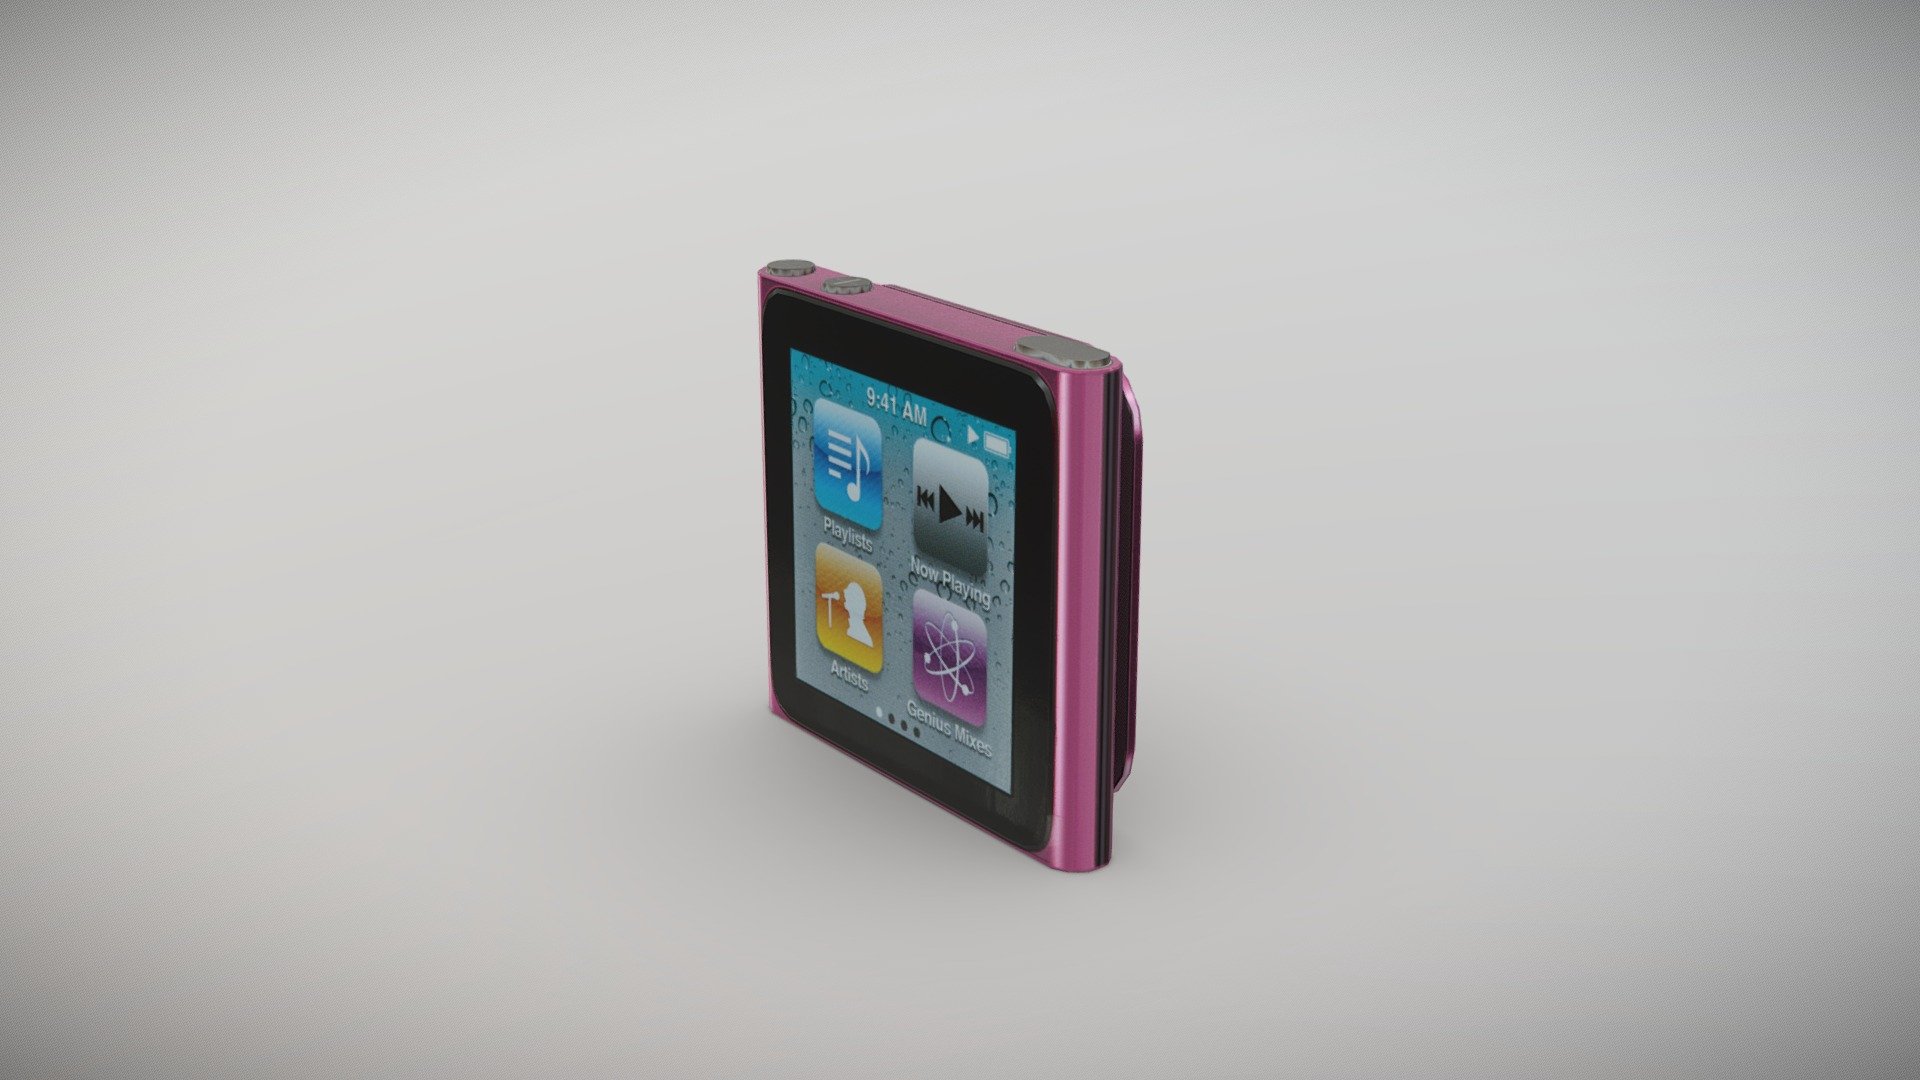 •   Let me present to you simple low-poly 3D model Apple iPod nano 6th Generation. Modeling was made with ortho-photos of real player that is why all details of design are recreated most authentically.

•    This model consists of one mesh, it is low-polygonal and it has only one material.

•   The total of the main textures is 1. Resolution of all textures is 2500 pixels square aspect ratio in .jpg format. 

•   Polygon count of the model is – 967.

•   The model has correct dimensions in real-world scale. All parts grouped and named correctly.

•   To use the model in other 3D programs there are scenes saved in formats .fbx, .obj, .DAE, .max (2010 version).

Note: If you see some artifacts on the textures, it means compression works in the Viewer. We recommend setting HD quality for textures. But anyway, original textures have no artifacts 3d model